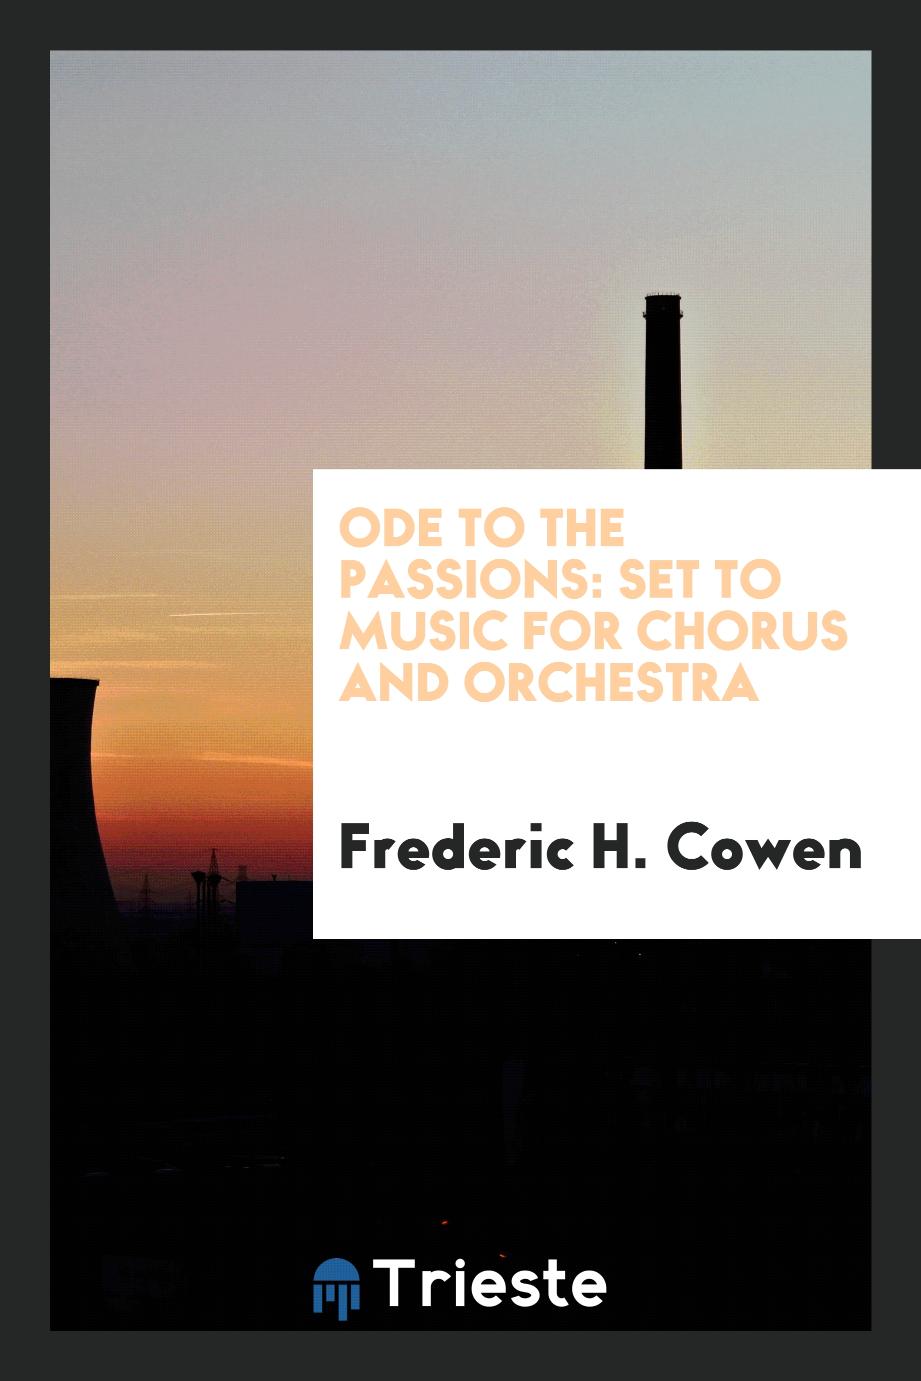 Ode to the passions: set to music for chorus and orchestra